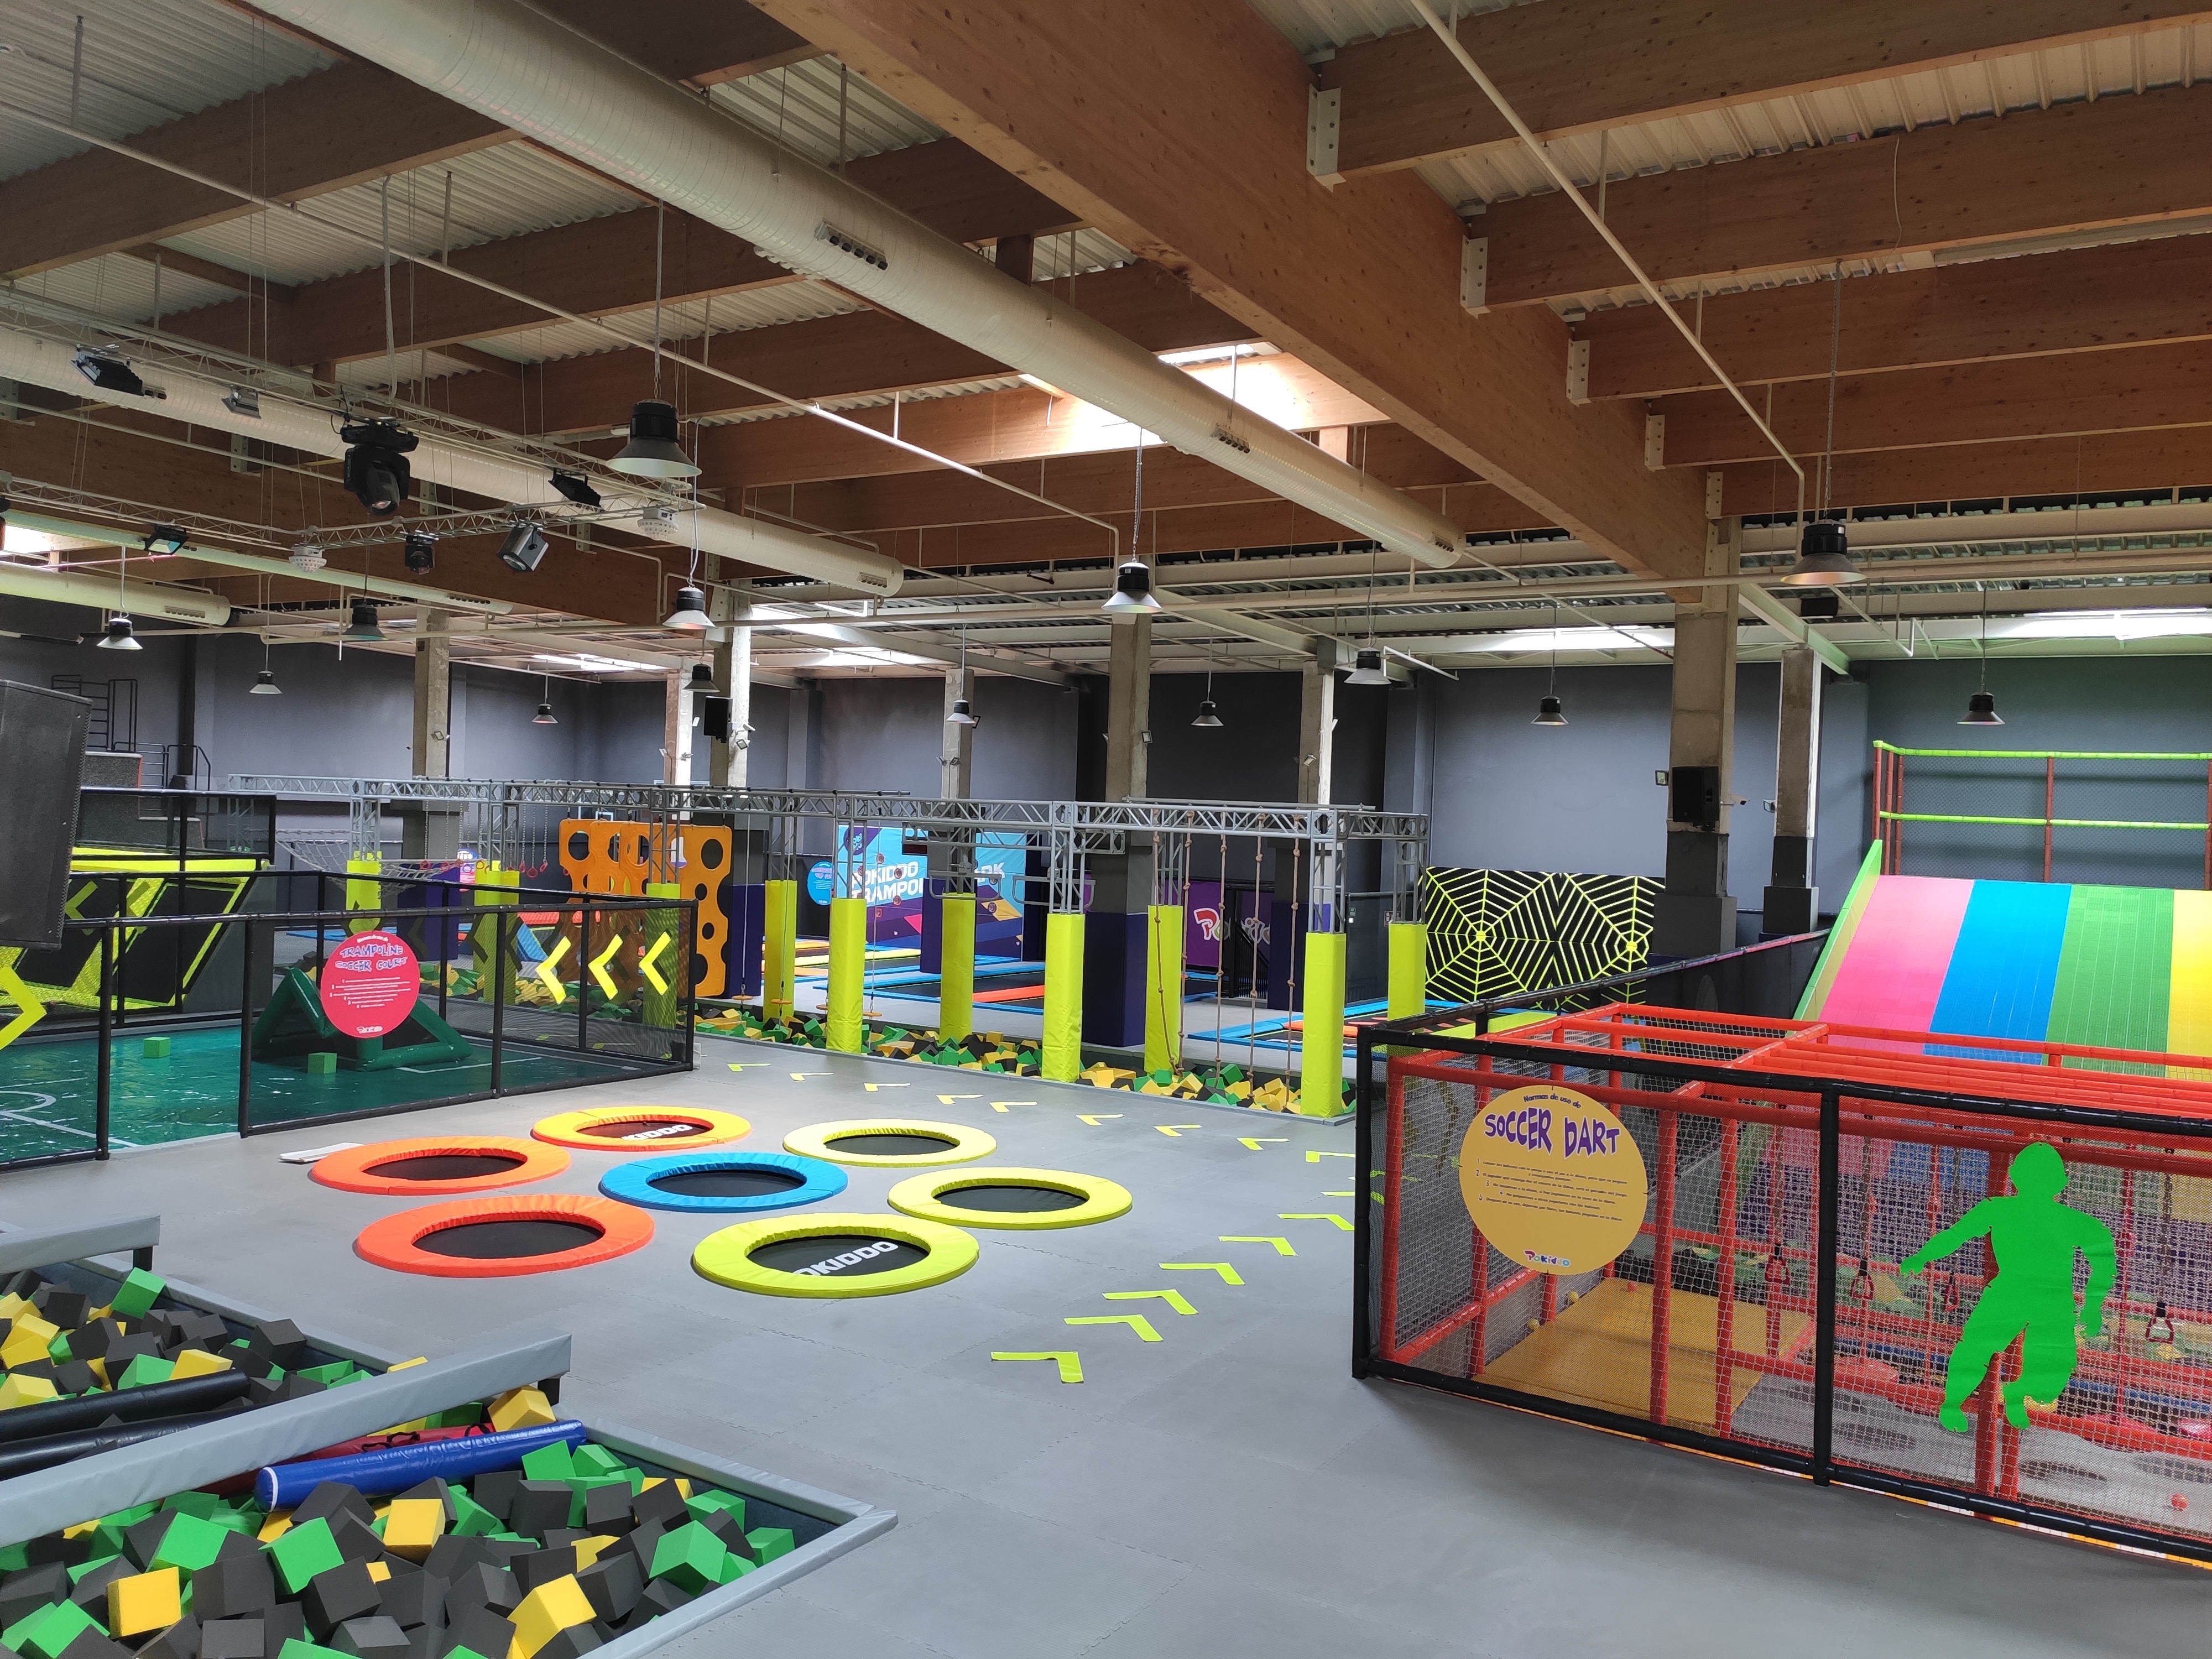 What Are The Risks of Opening A Trampoline Park?